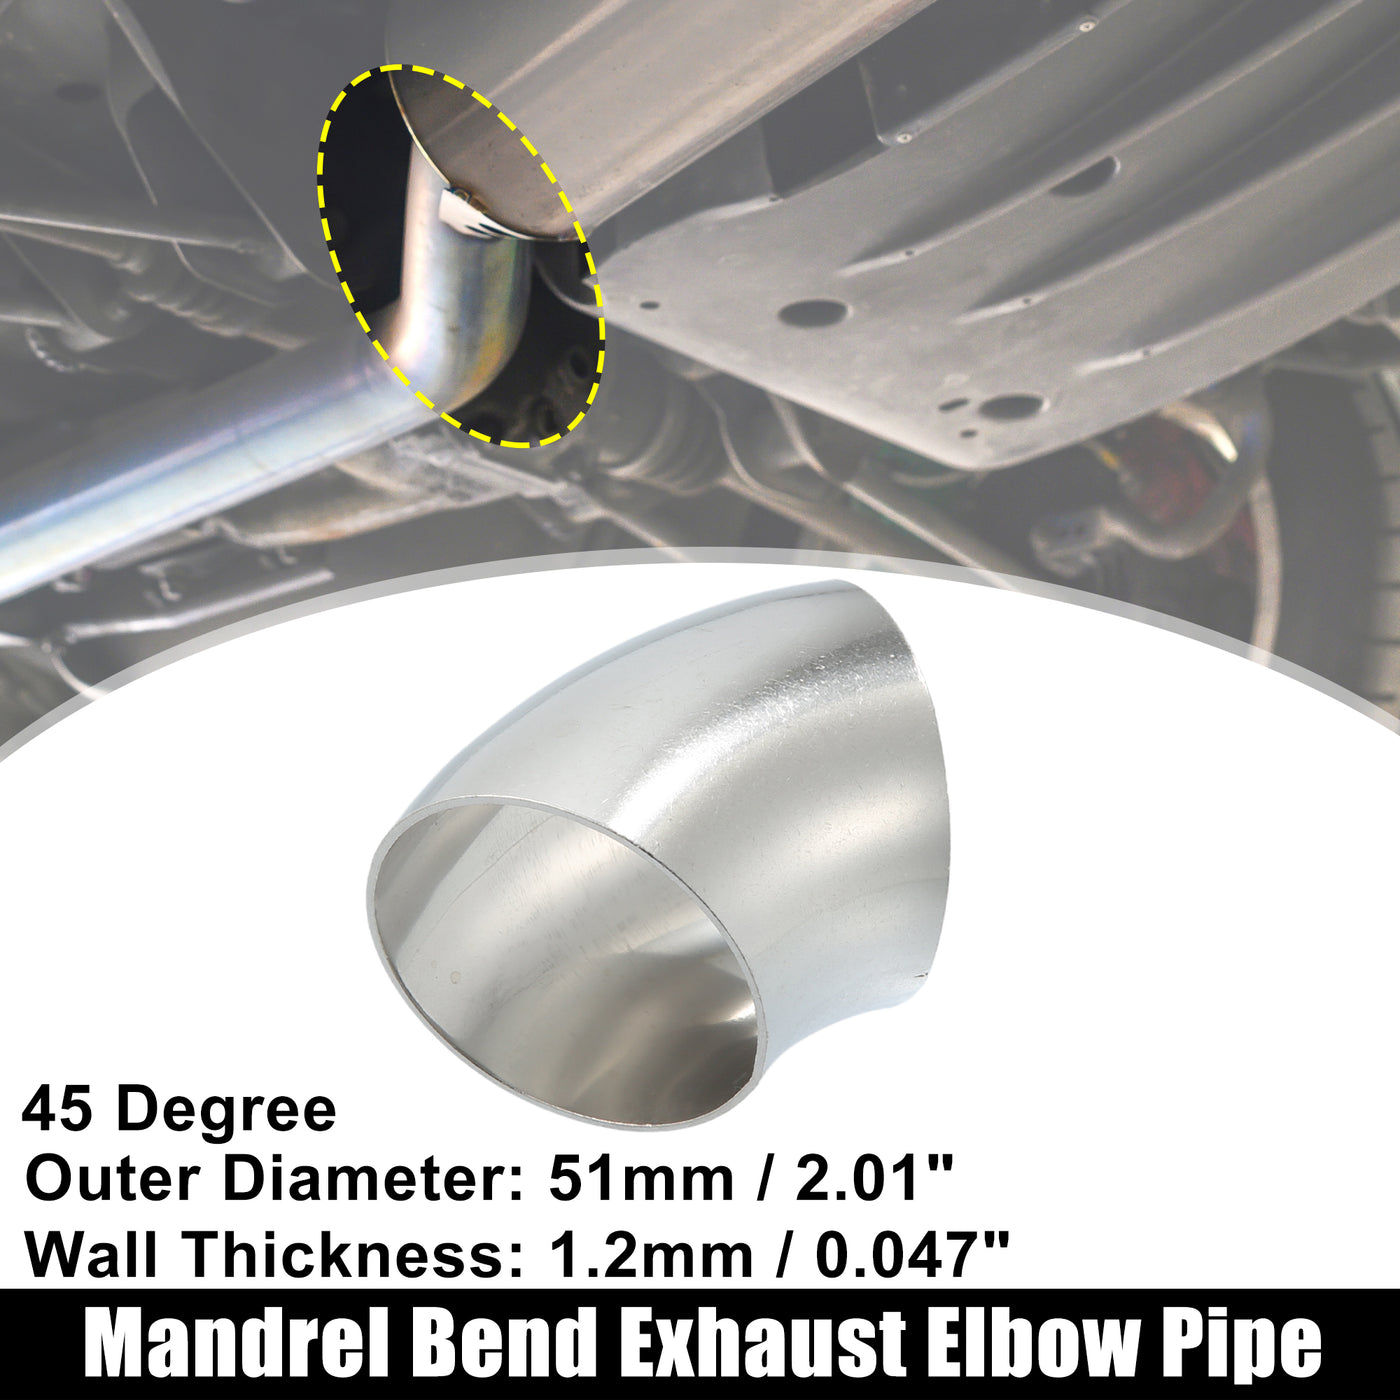 X AUTOHAUX OD 2" 45 Degree Mandrel Bend Exhaust Elbow Pipe SS304 Stainless Steel Bend Tube 20GA /.036" Wall Thickness Exhaust Piping for Car Exhaust Pipe Elbow Modified Silver Tone 1pcs